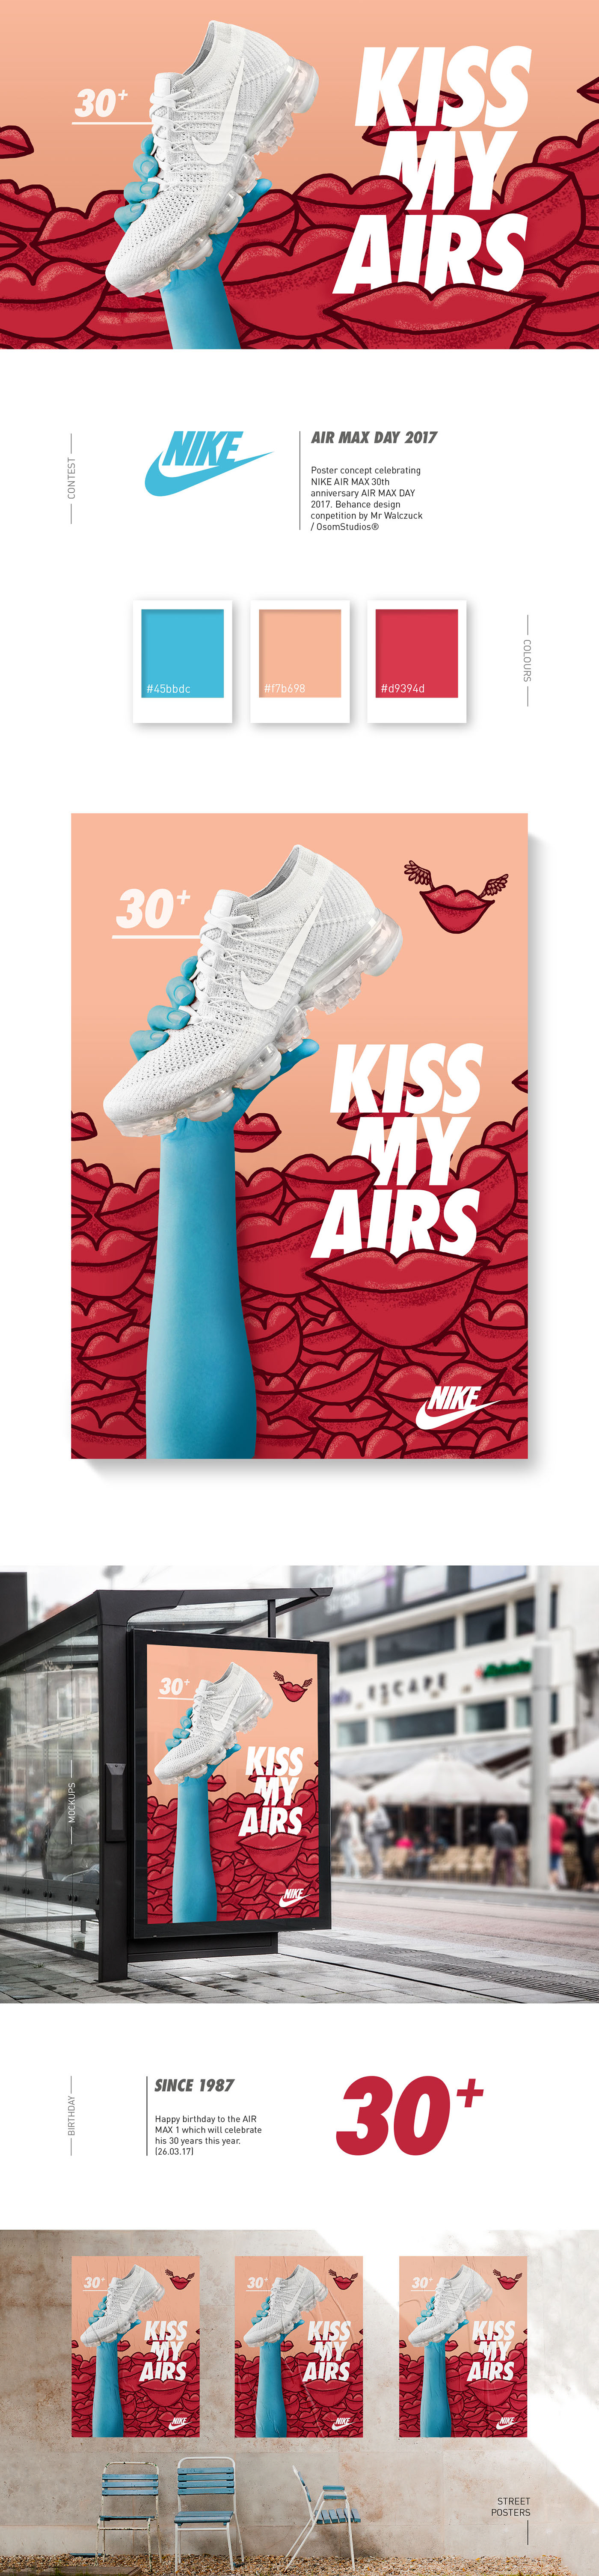 Nike poster Mockup air max design Kiss My Airs publicity contest sneaker ILLUSTRATION 